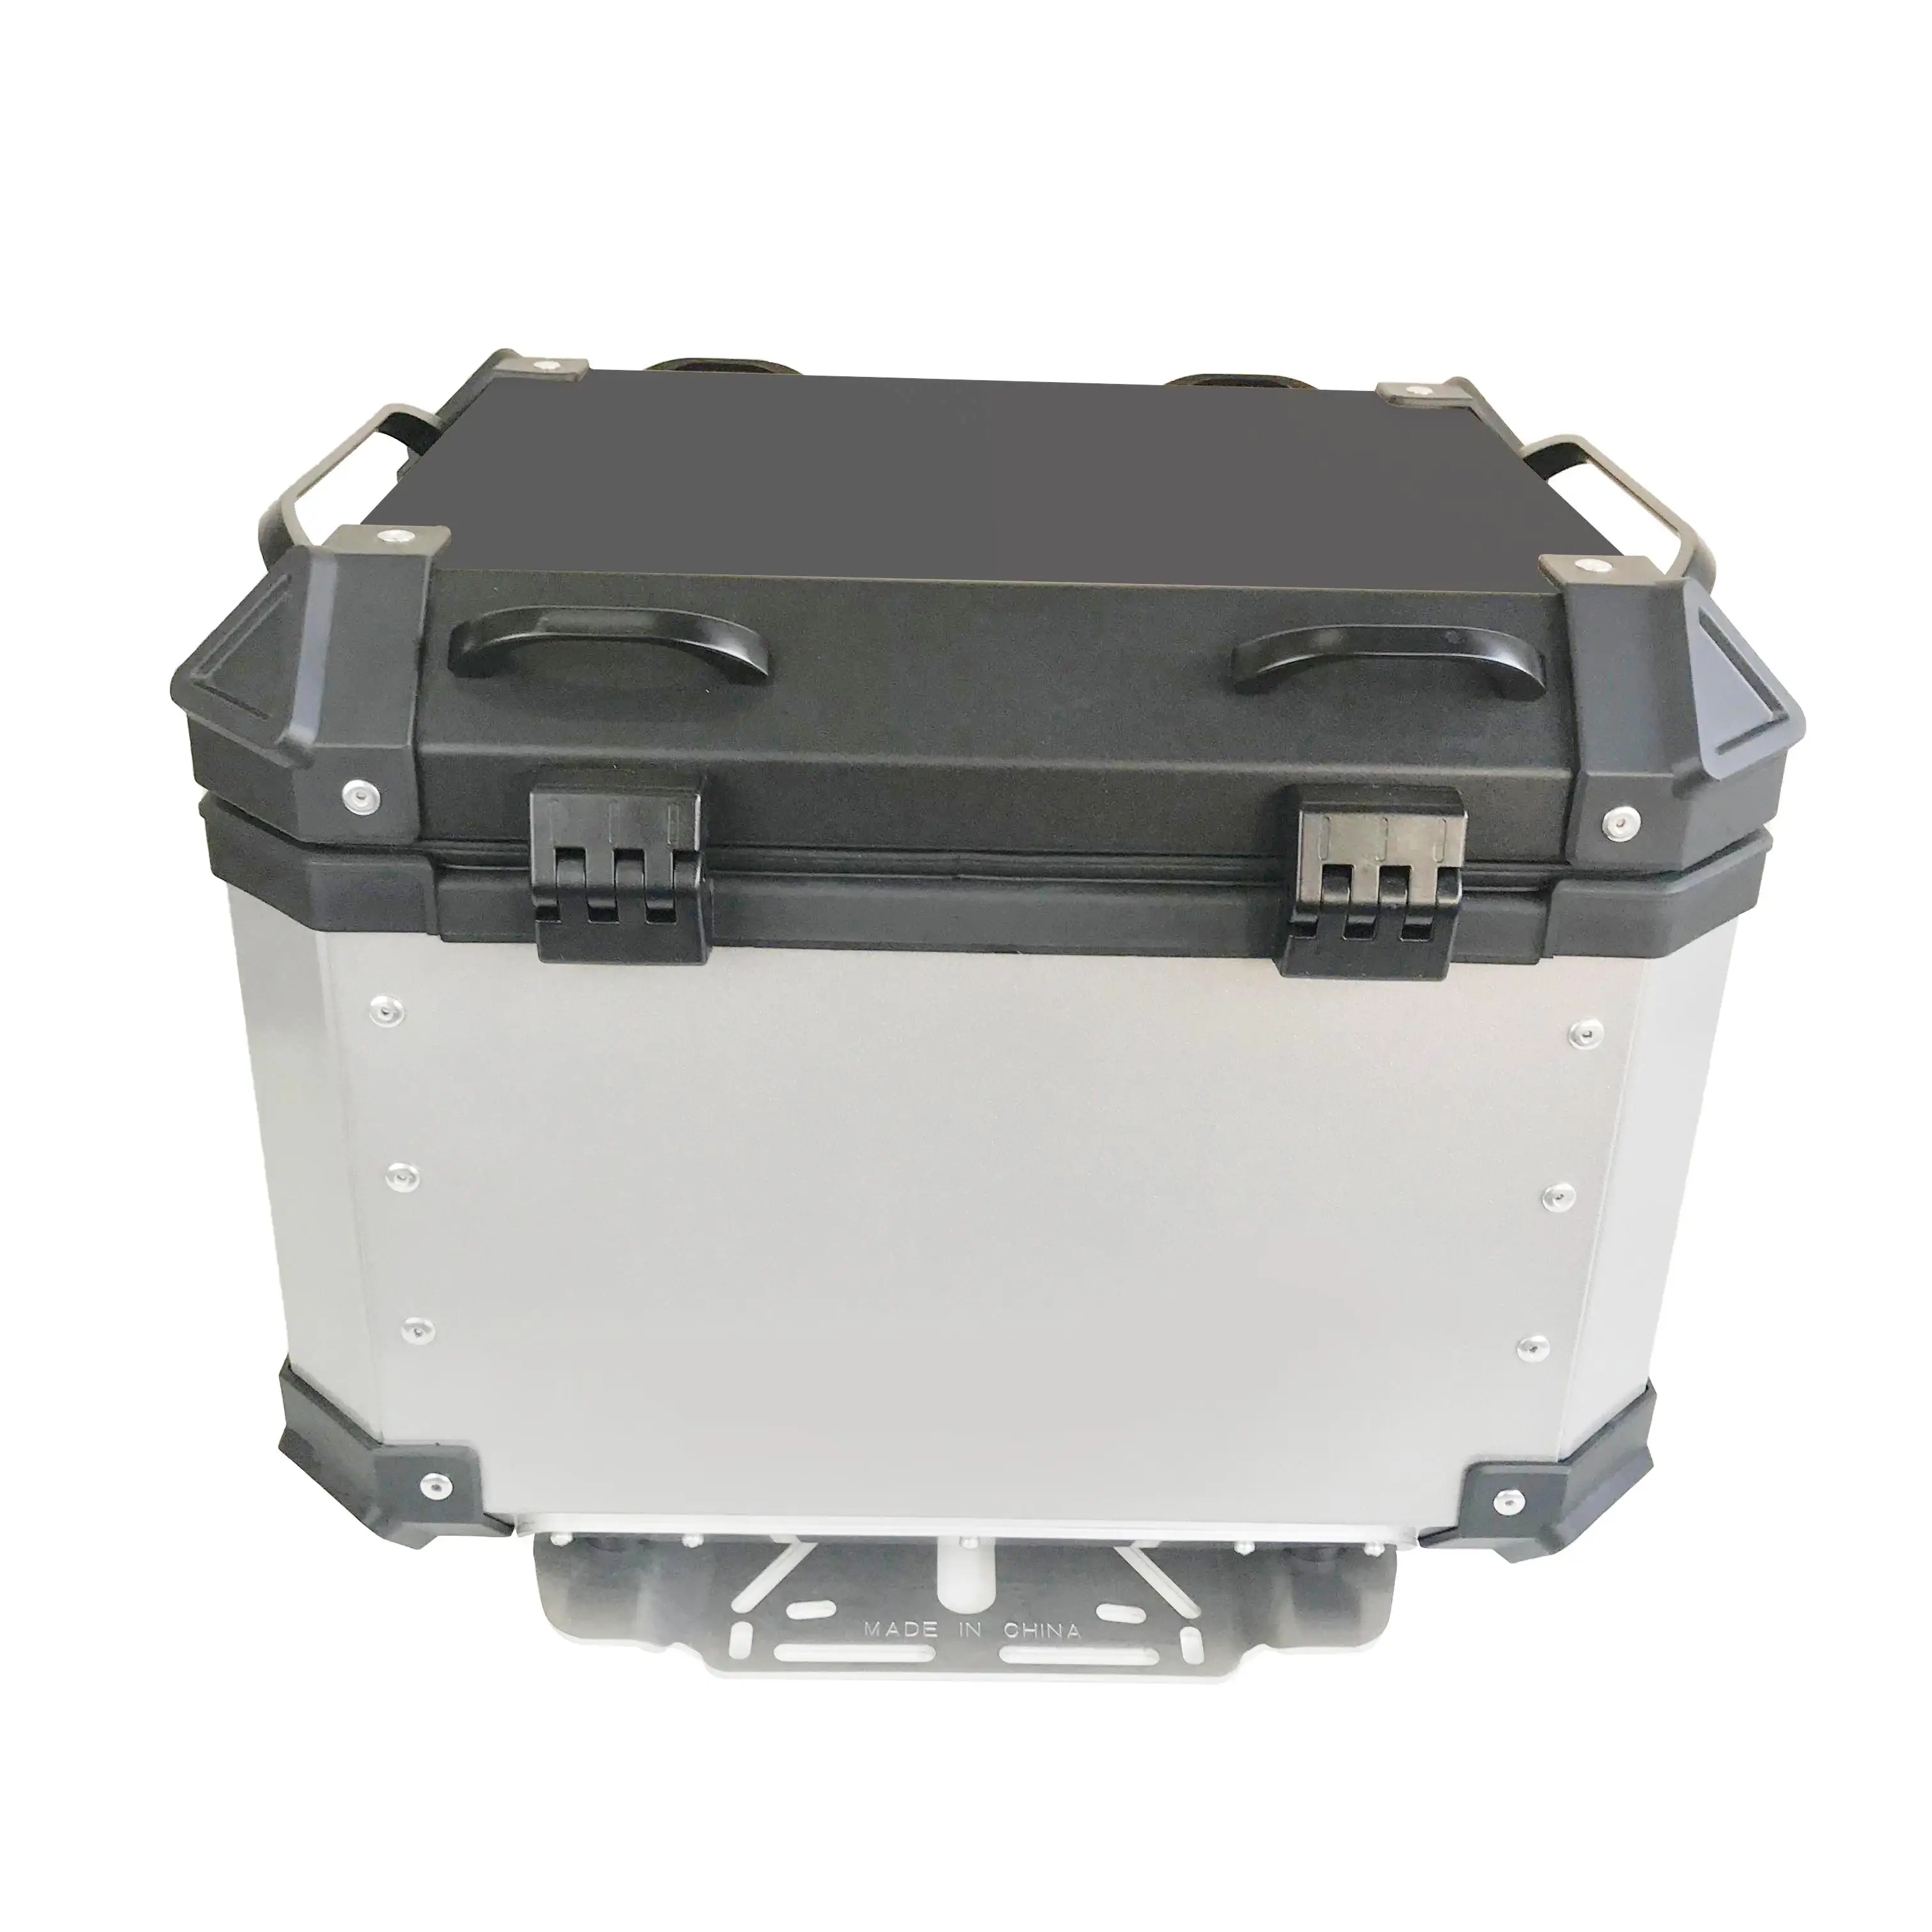 OHHO Silver Motorcycle Tail Box 45l Delivery Box Motorcycle Top Case Motorcycle Aluminum Top Box